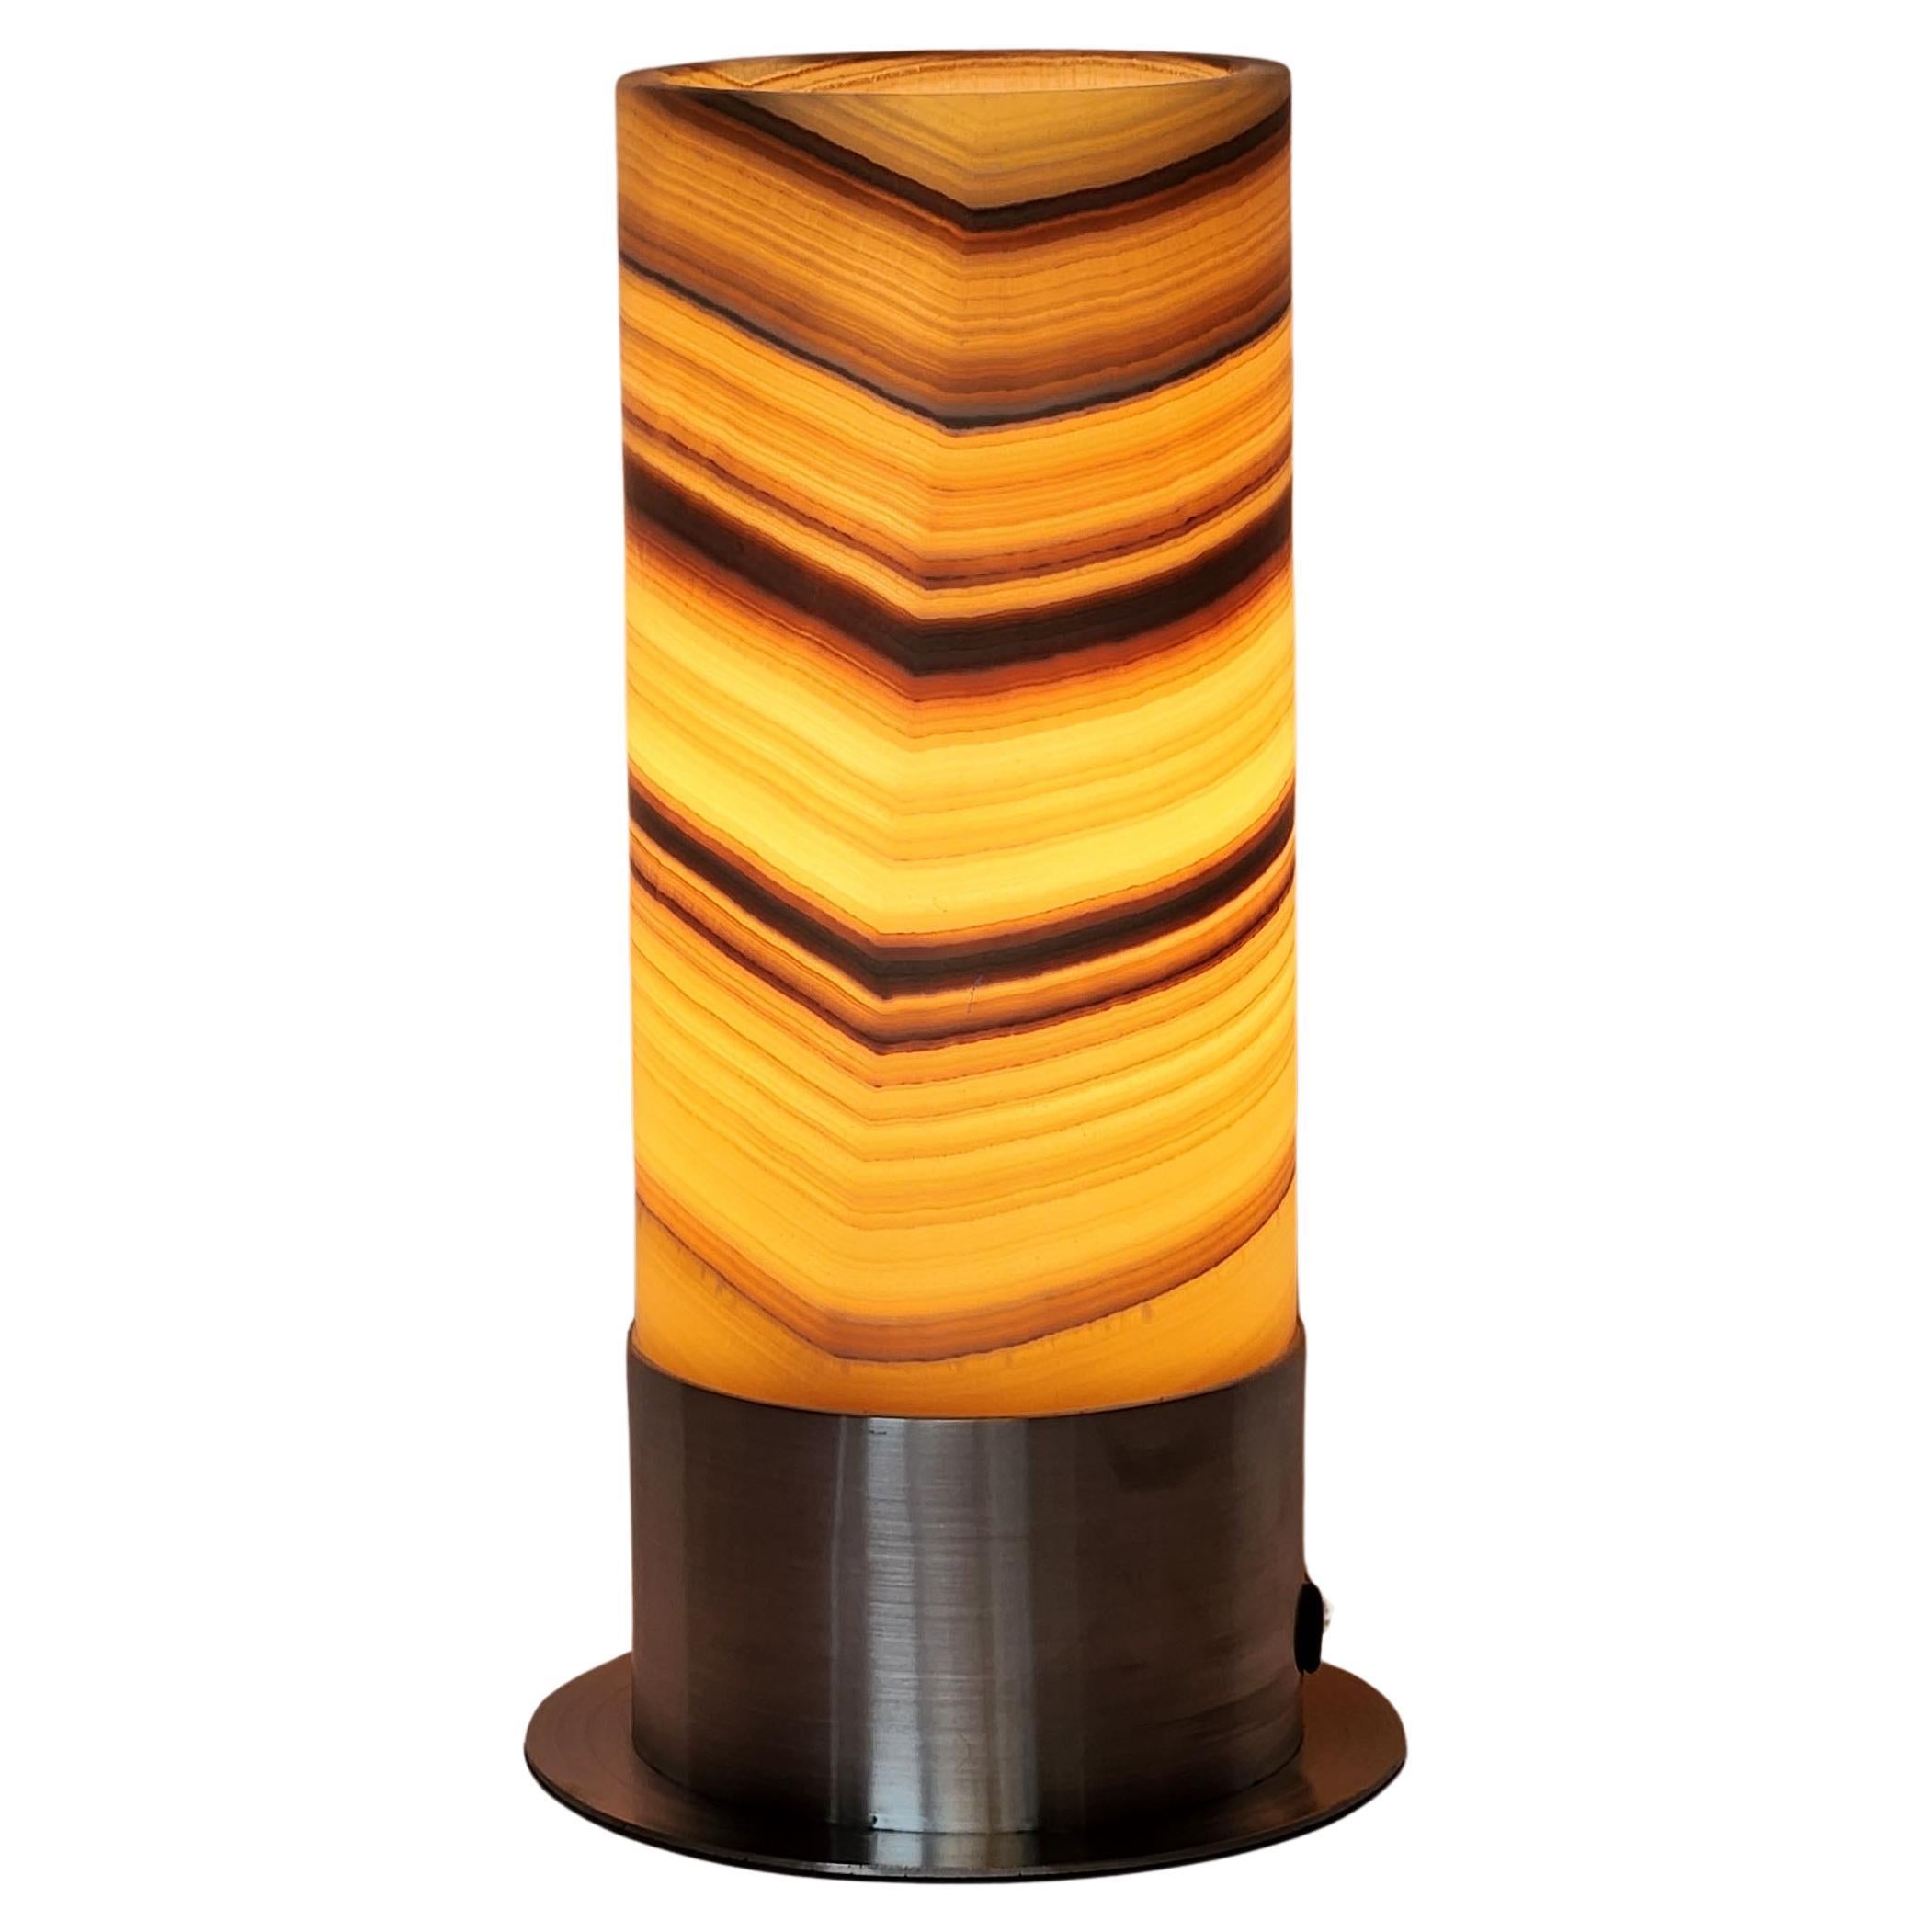 Ambient Onyx Table Lamp with Leather-Backed Stainless Steel Base